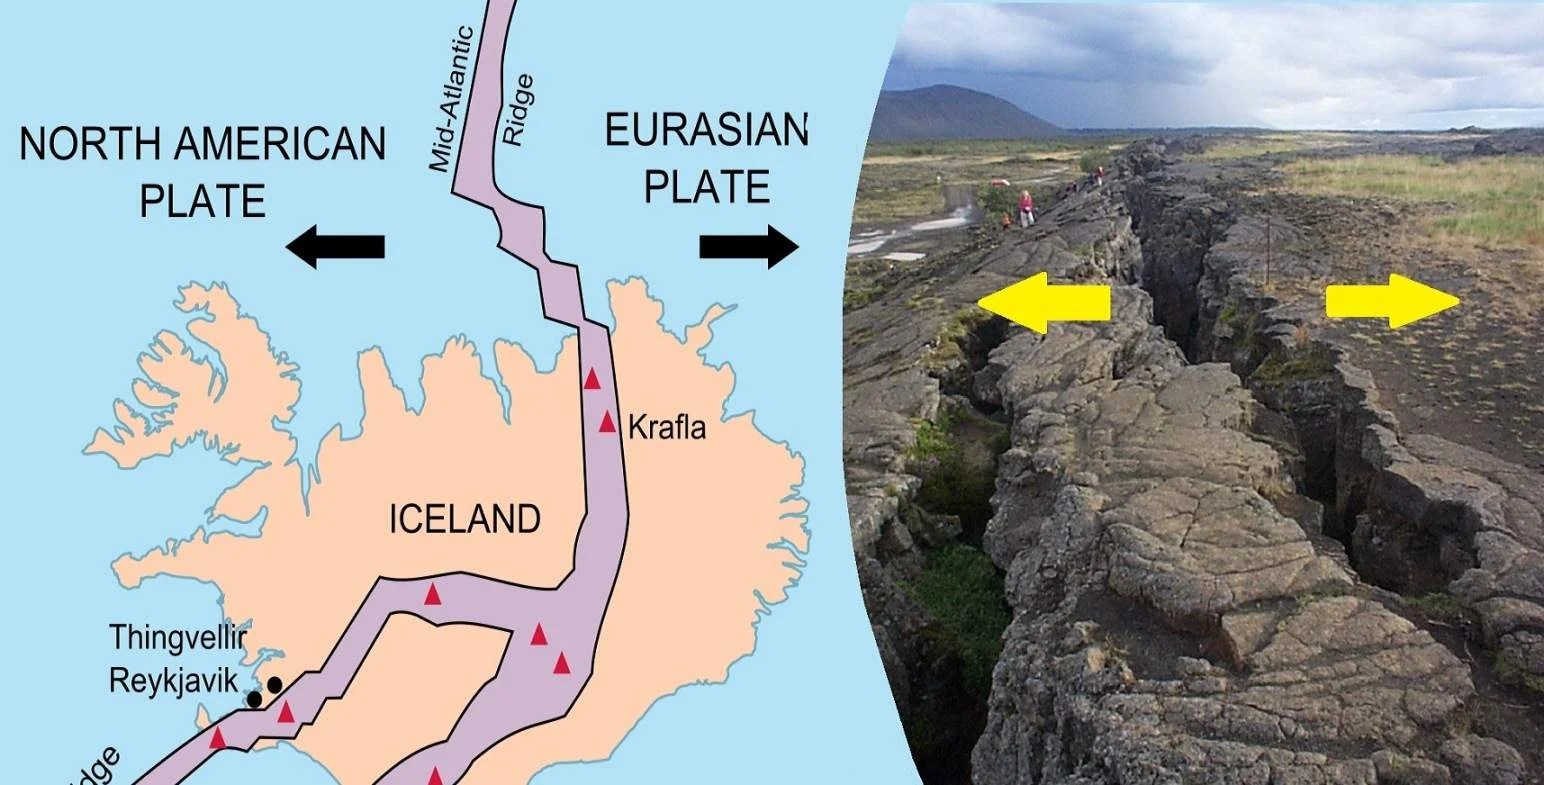 Iceland’s position on the boundary between the Eurasian and North American tectonic plates means it’s ‘slowly being split apart.